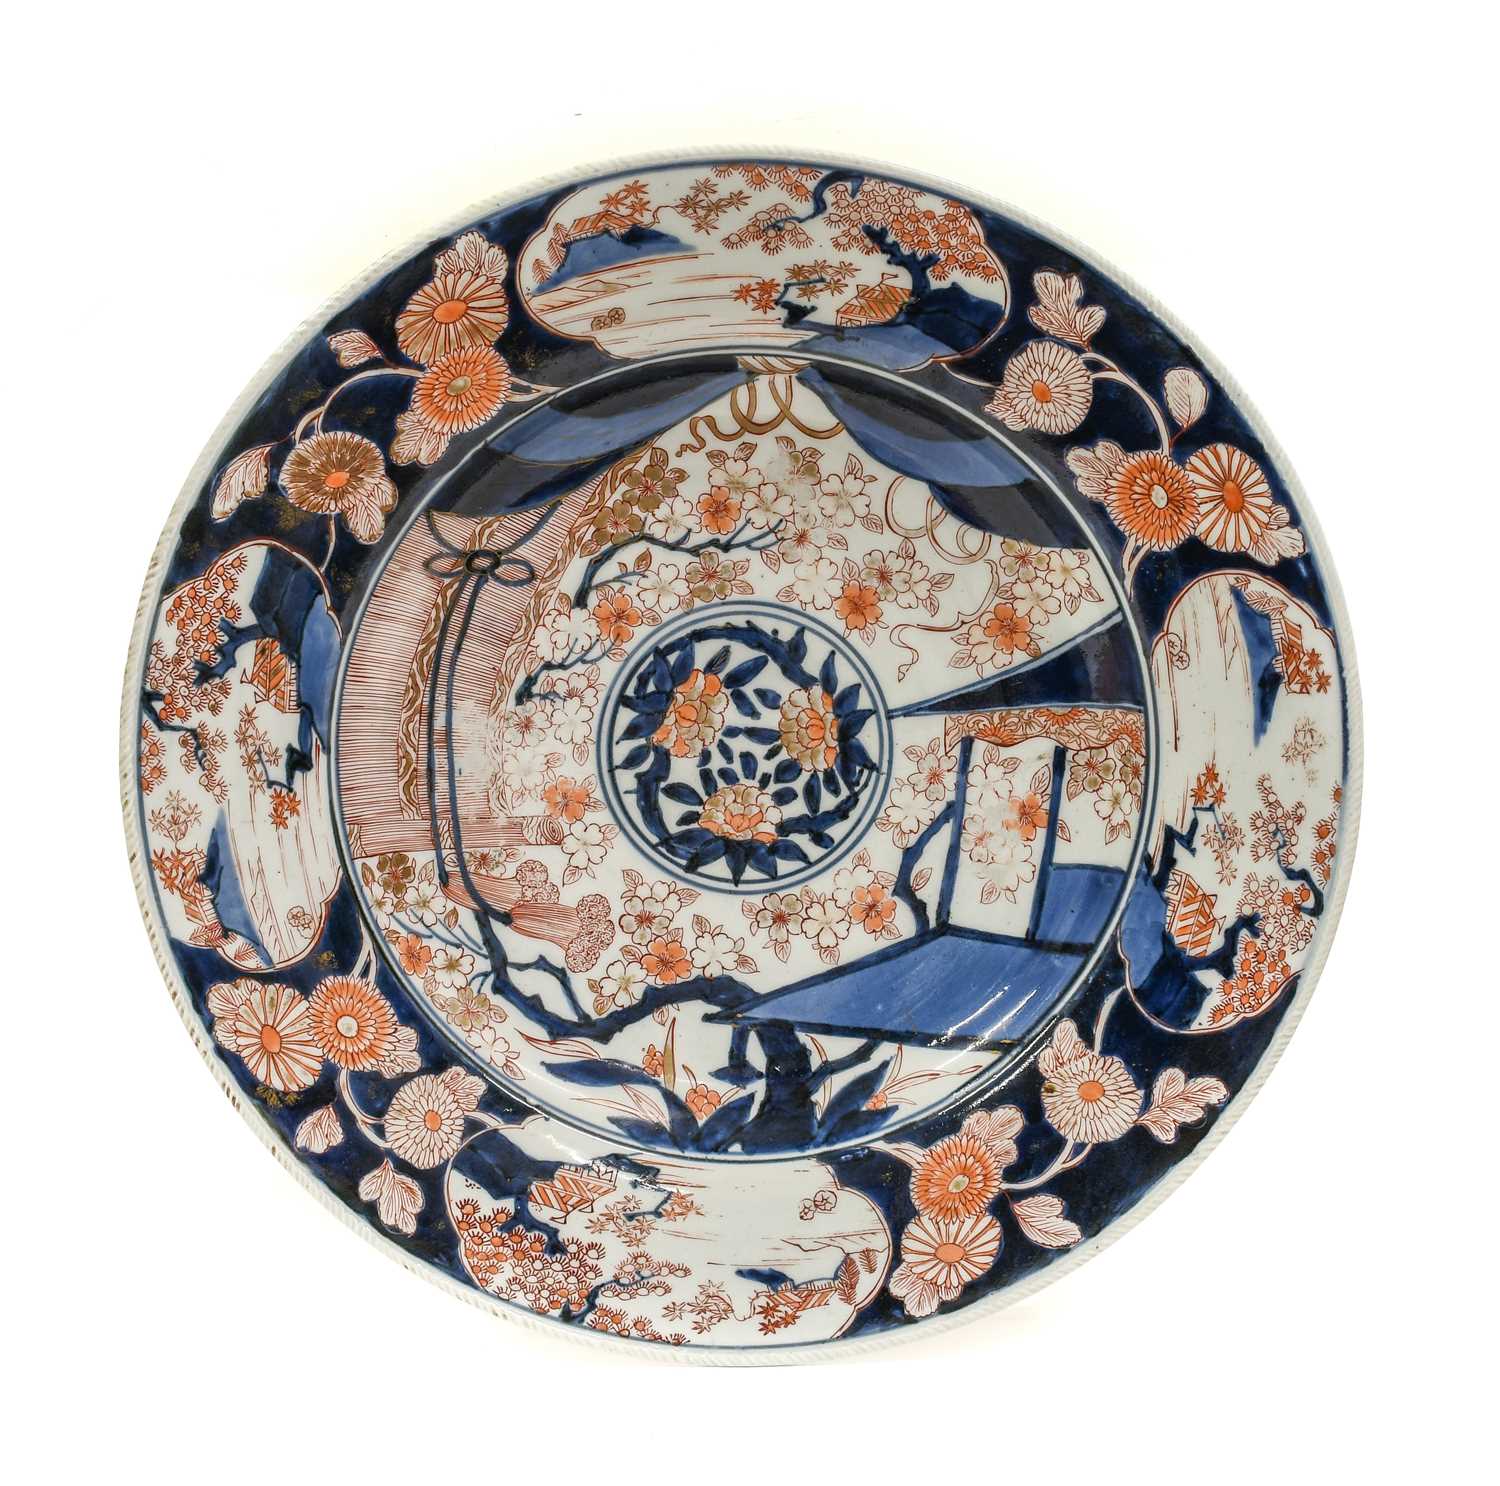 An Imari Porcelain Dish, Edo period, circa 1700, typically painted with a central roundel of flowers